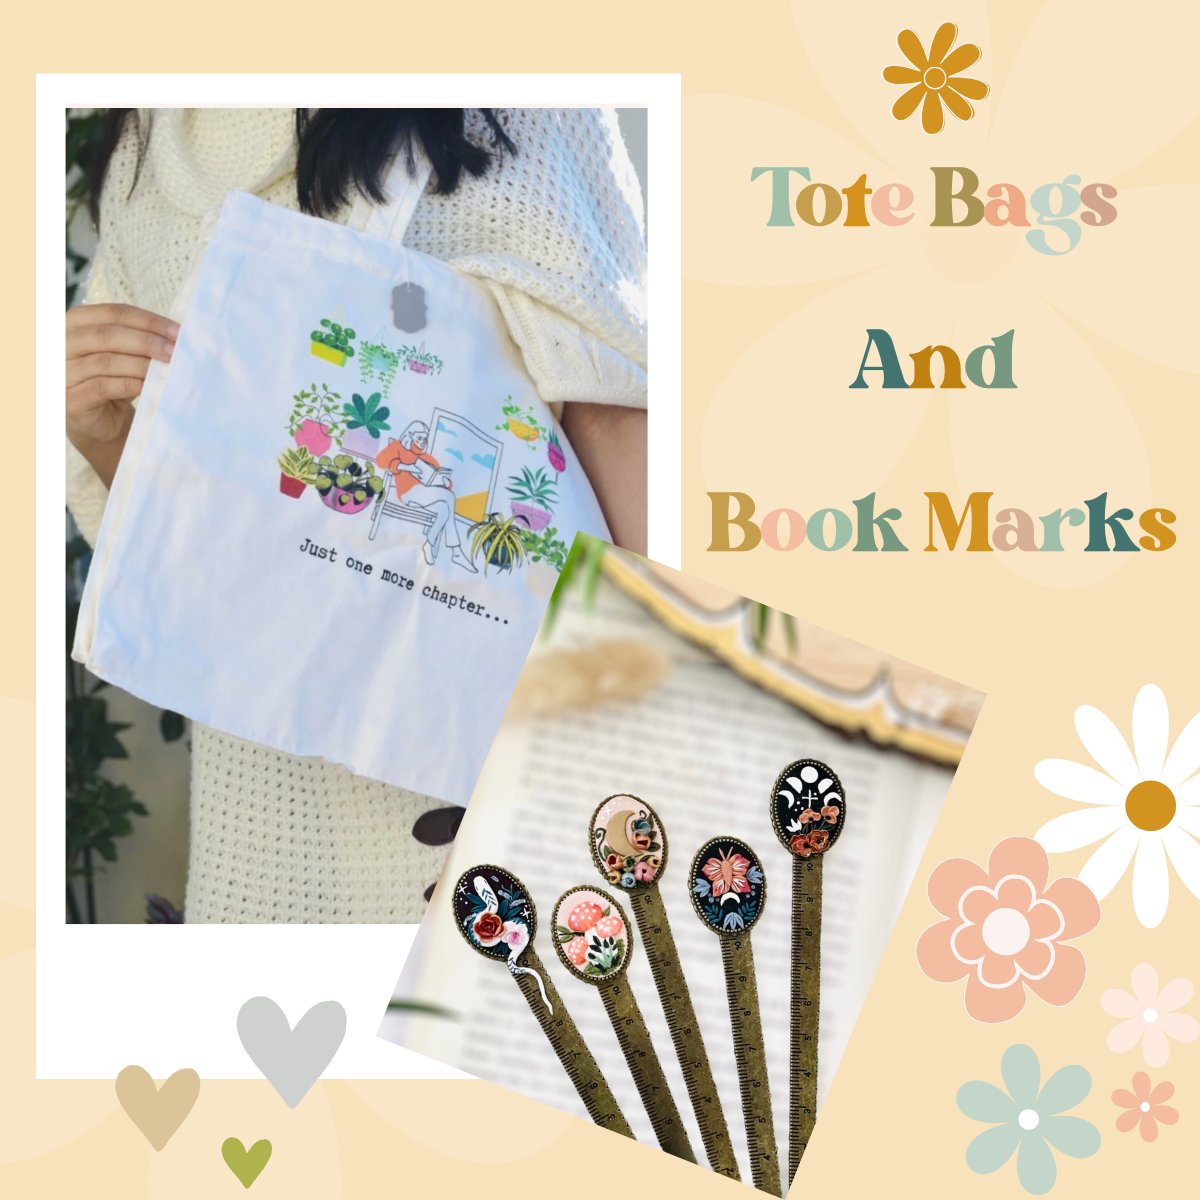 Tote Bags and Book Marks